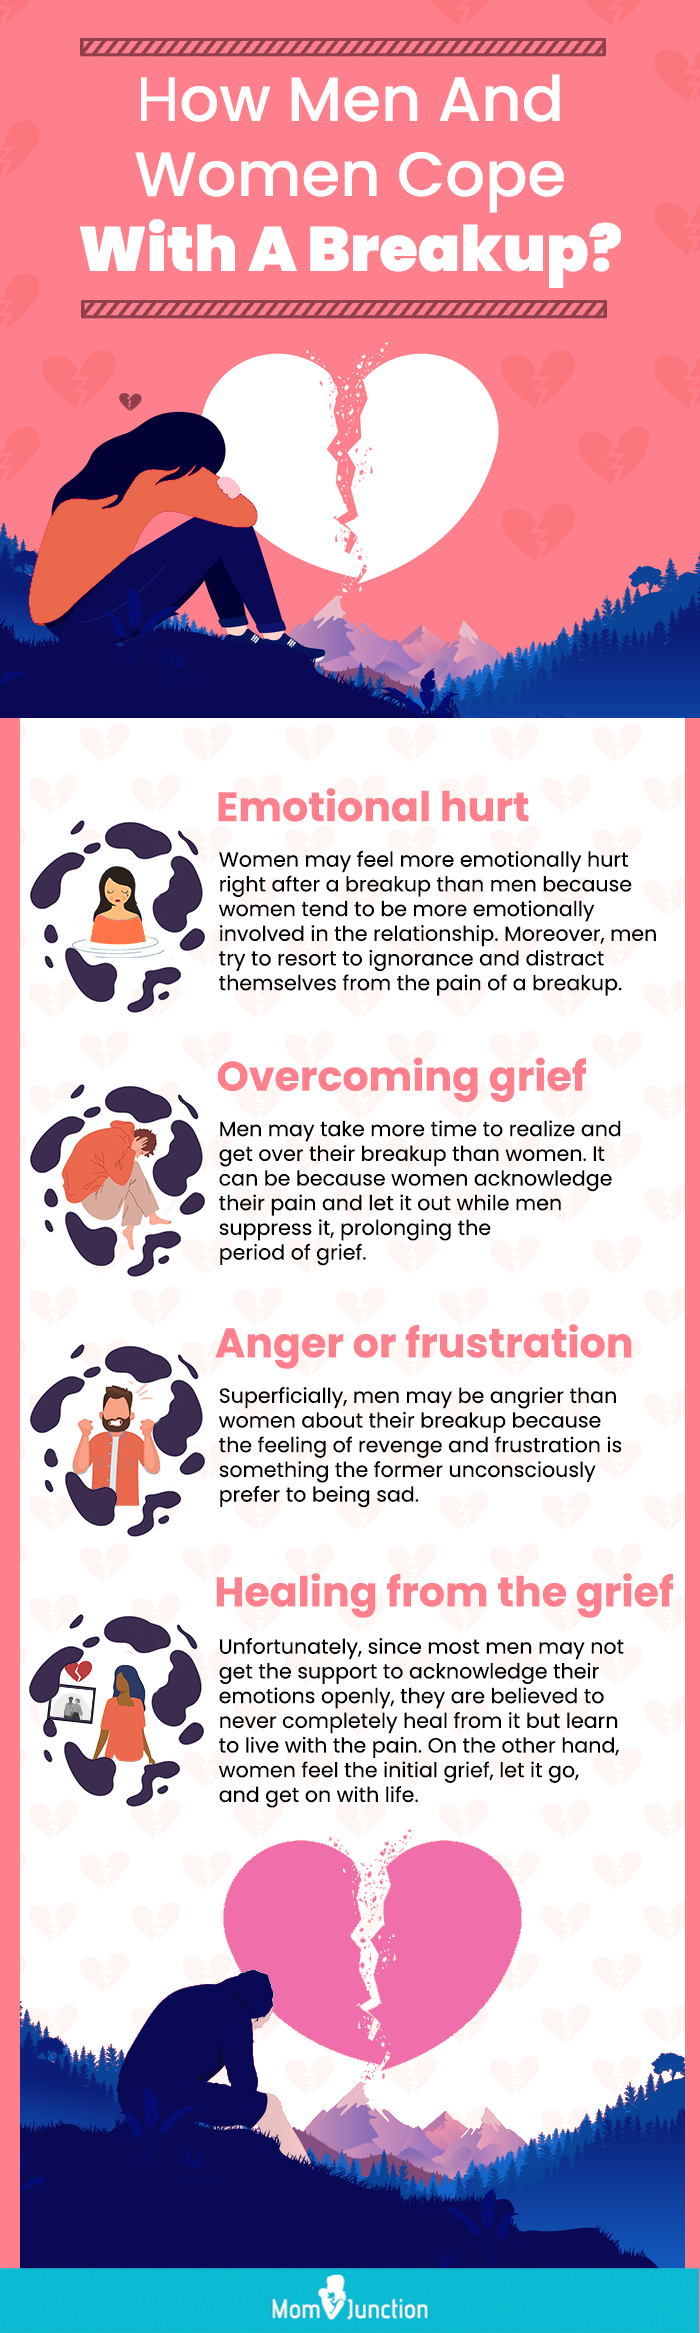 men and women after a breakup (infographic)